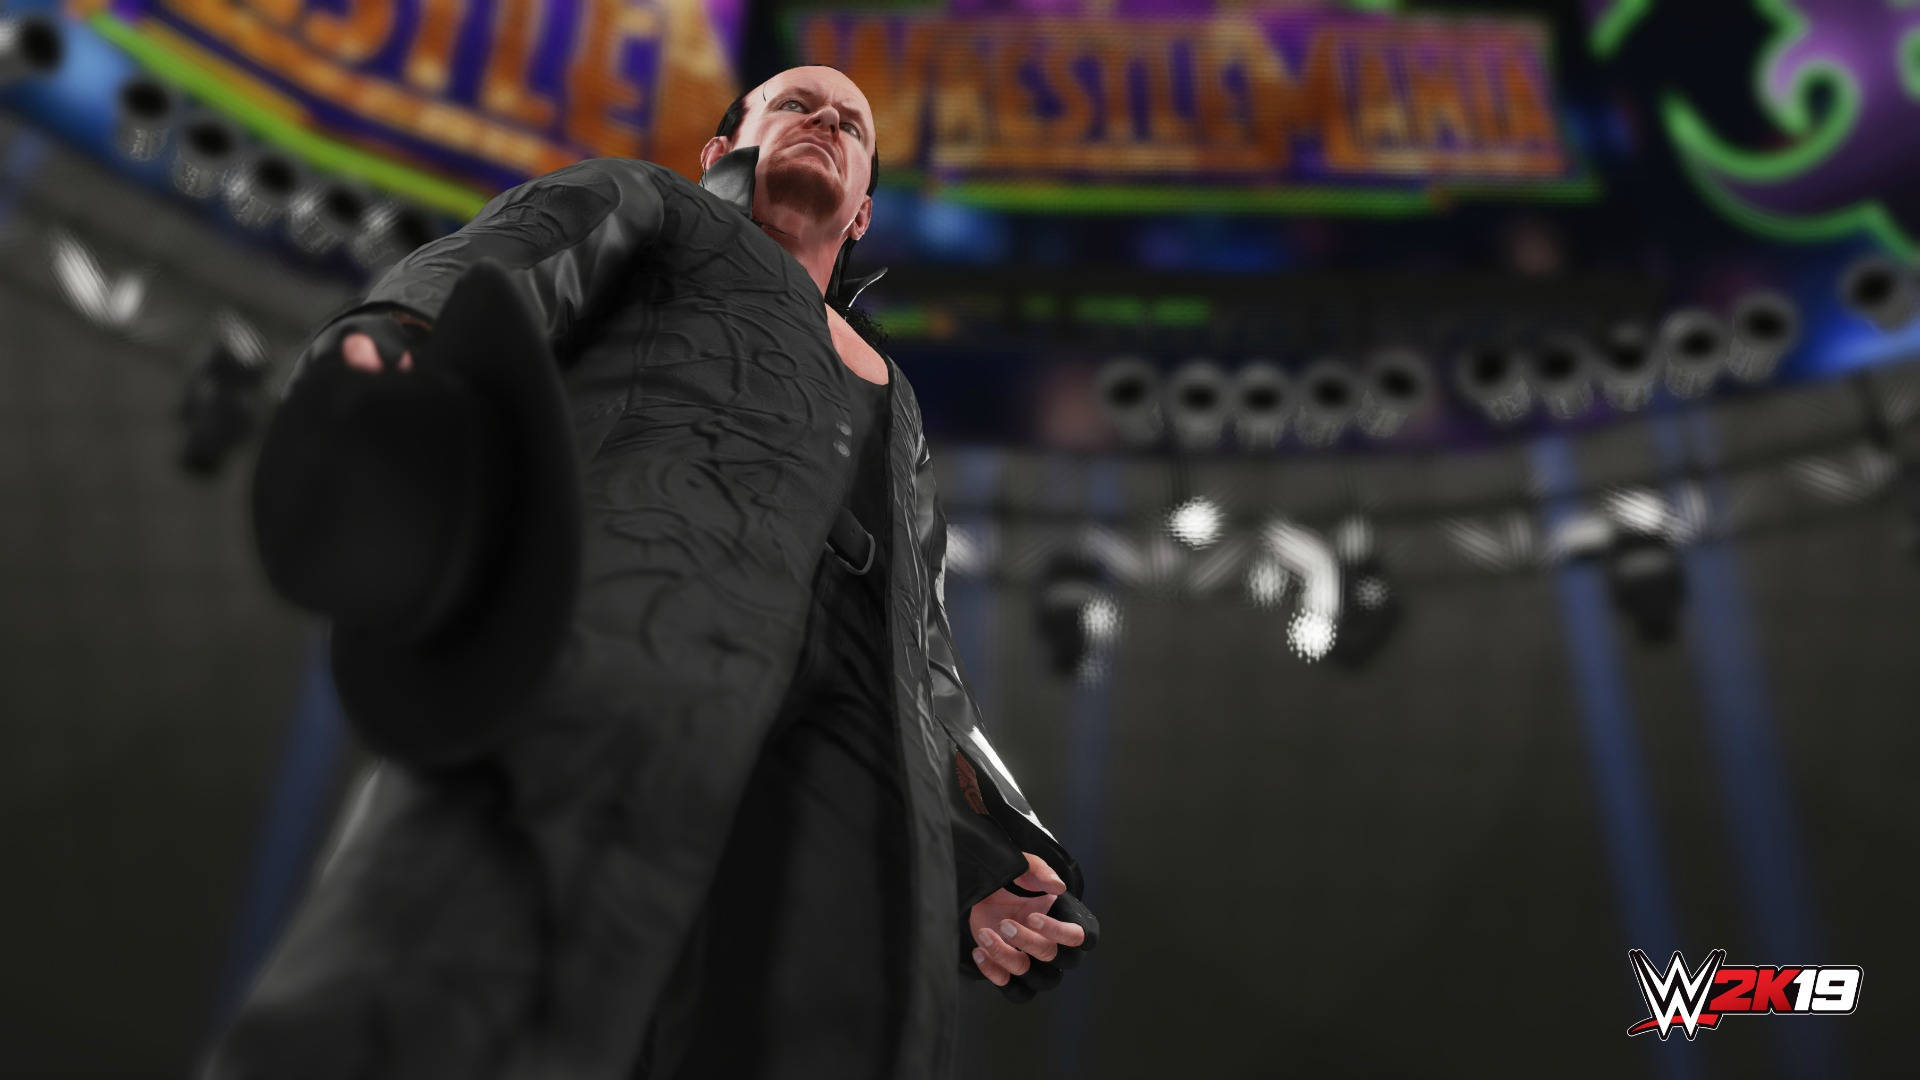 The Undertaker In Wwe Video Game Action Background